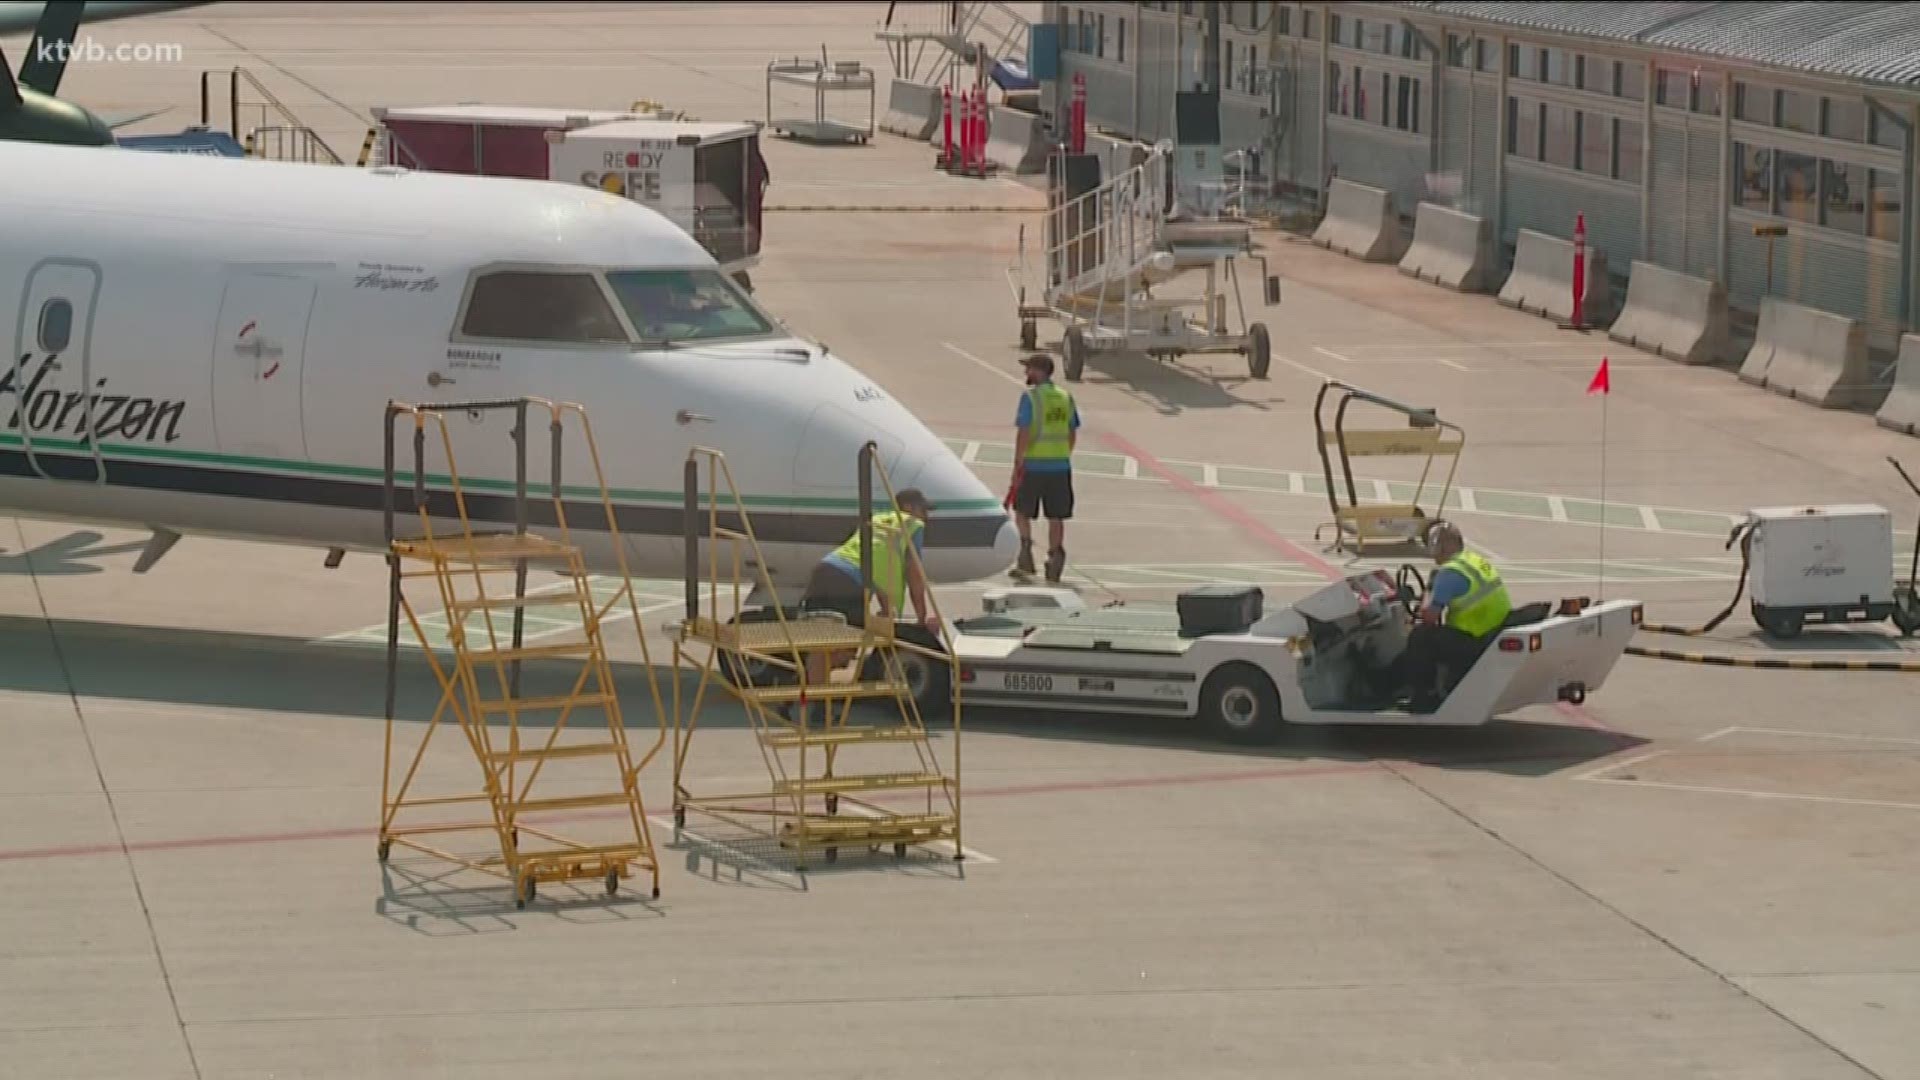 Officials are planning to increase capacity at the Boise Airport including more gates and parking.